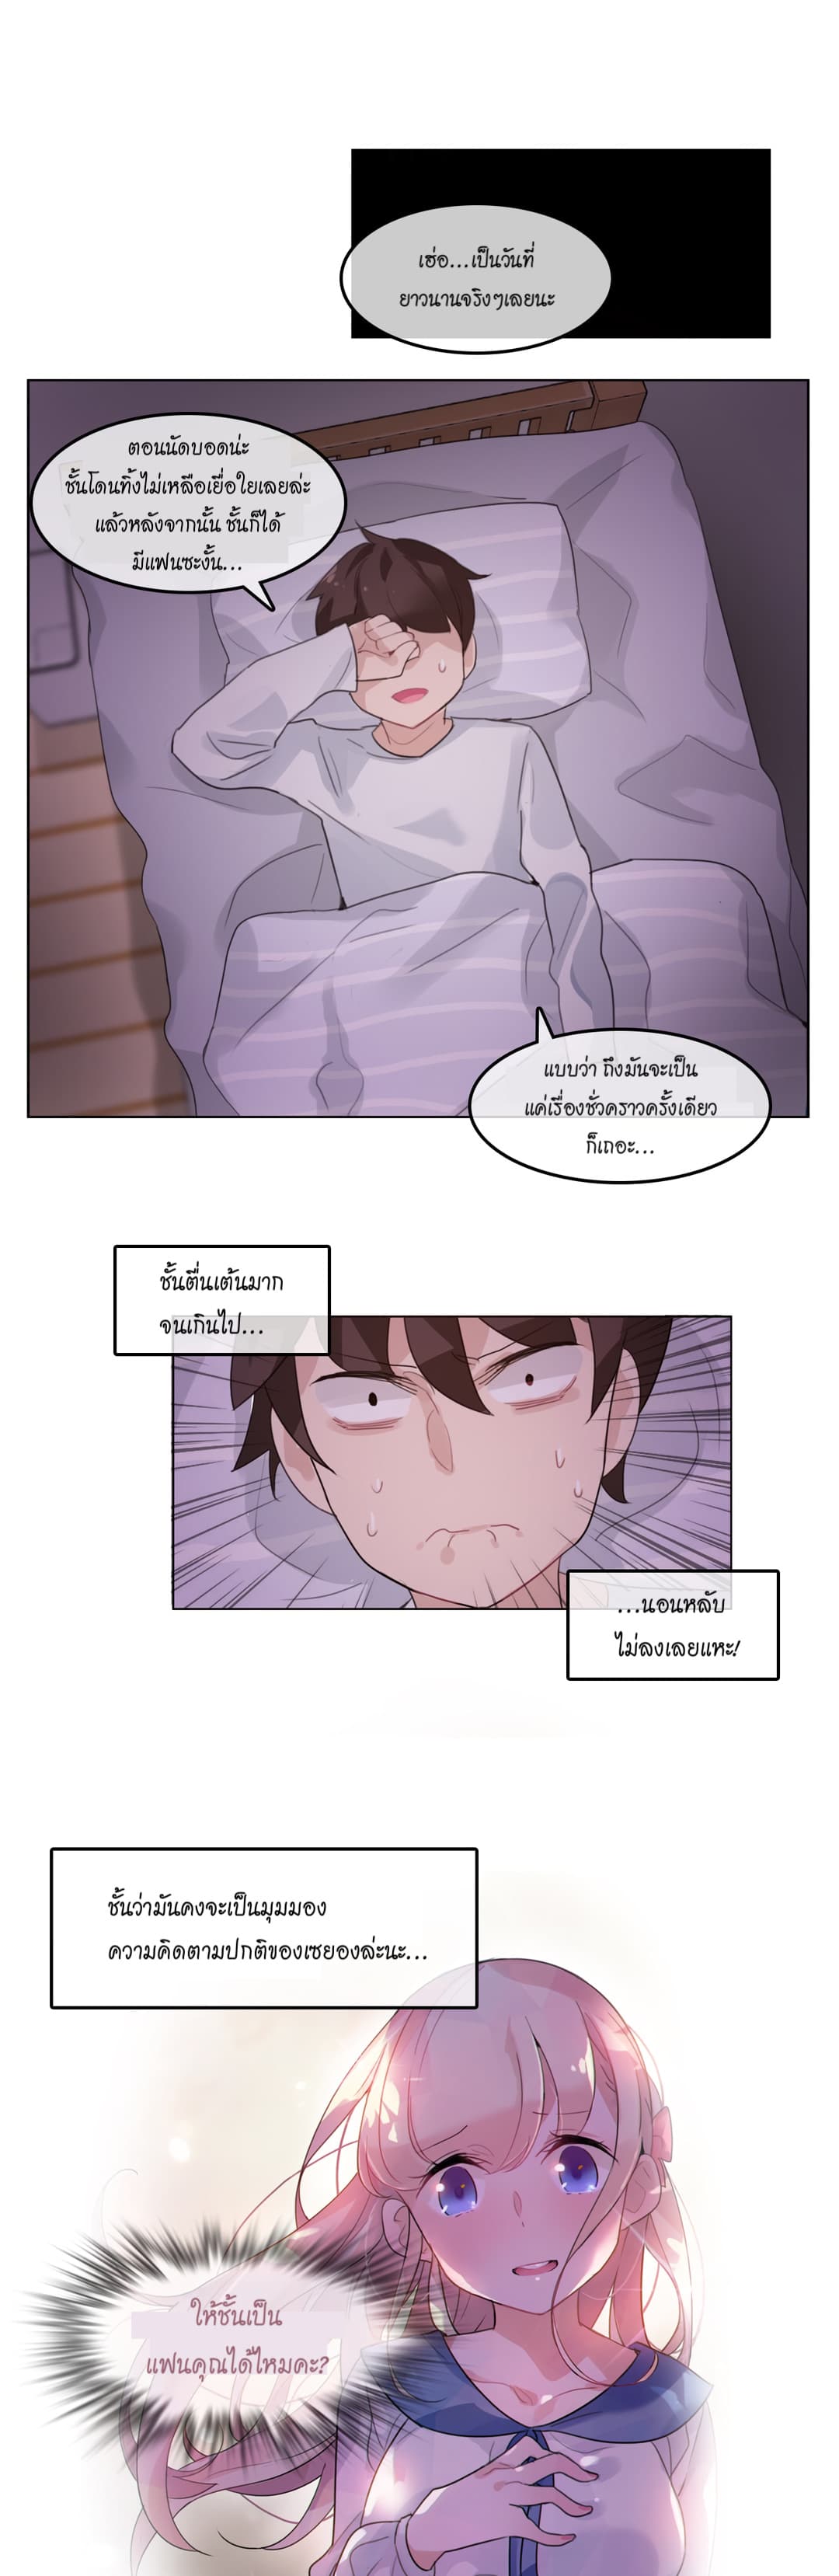 A Pervert’s Daily Life 28 (10)